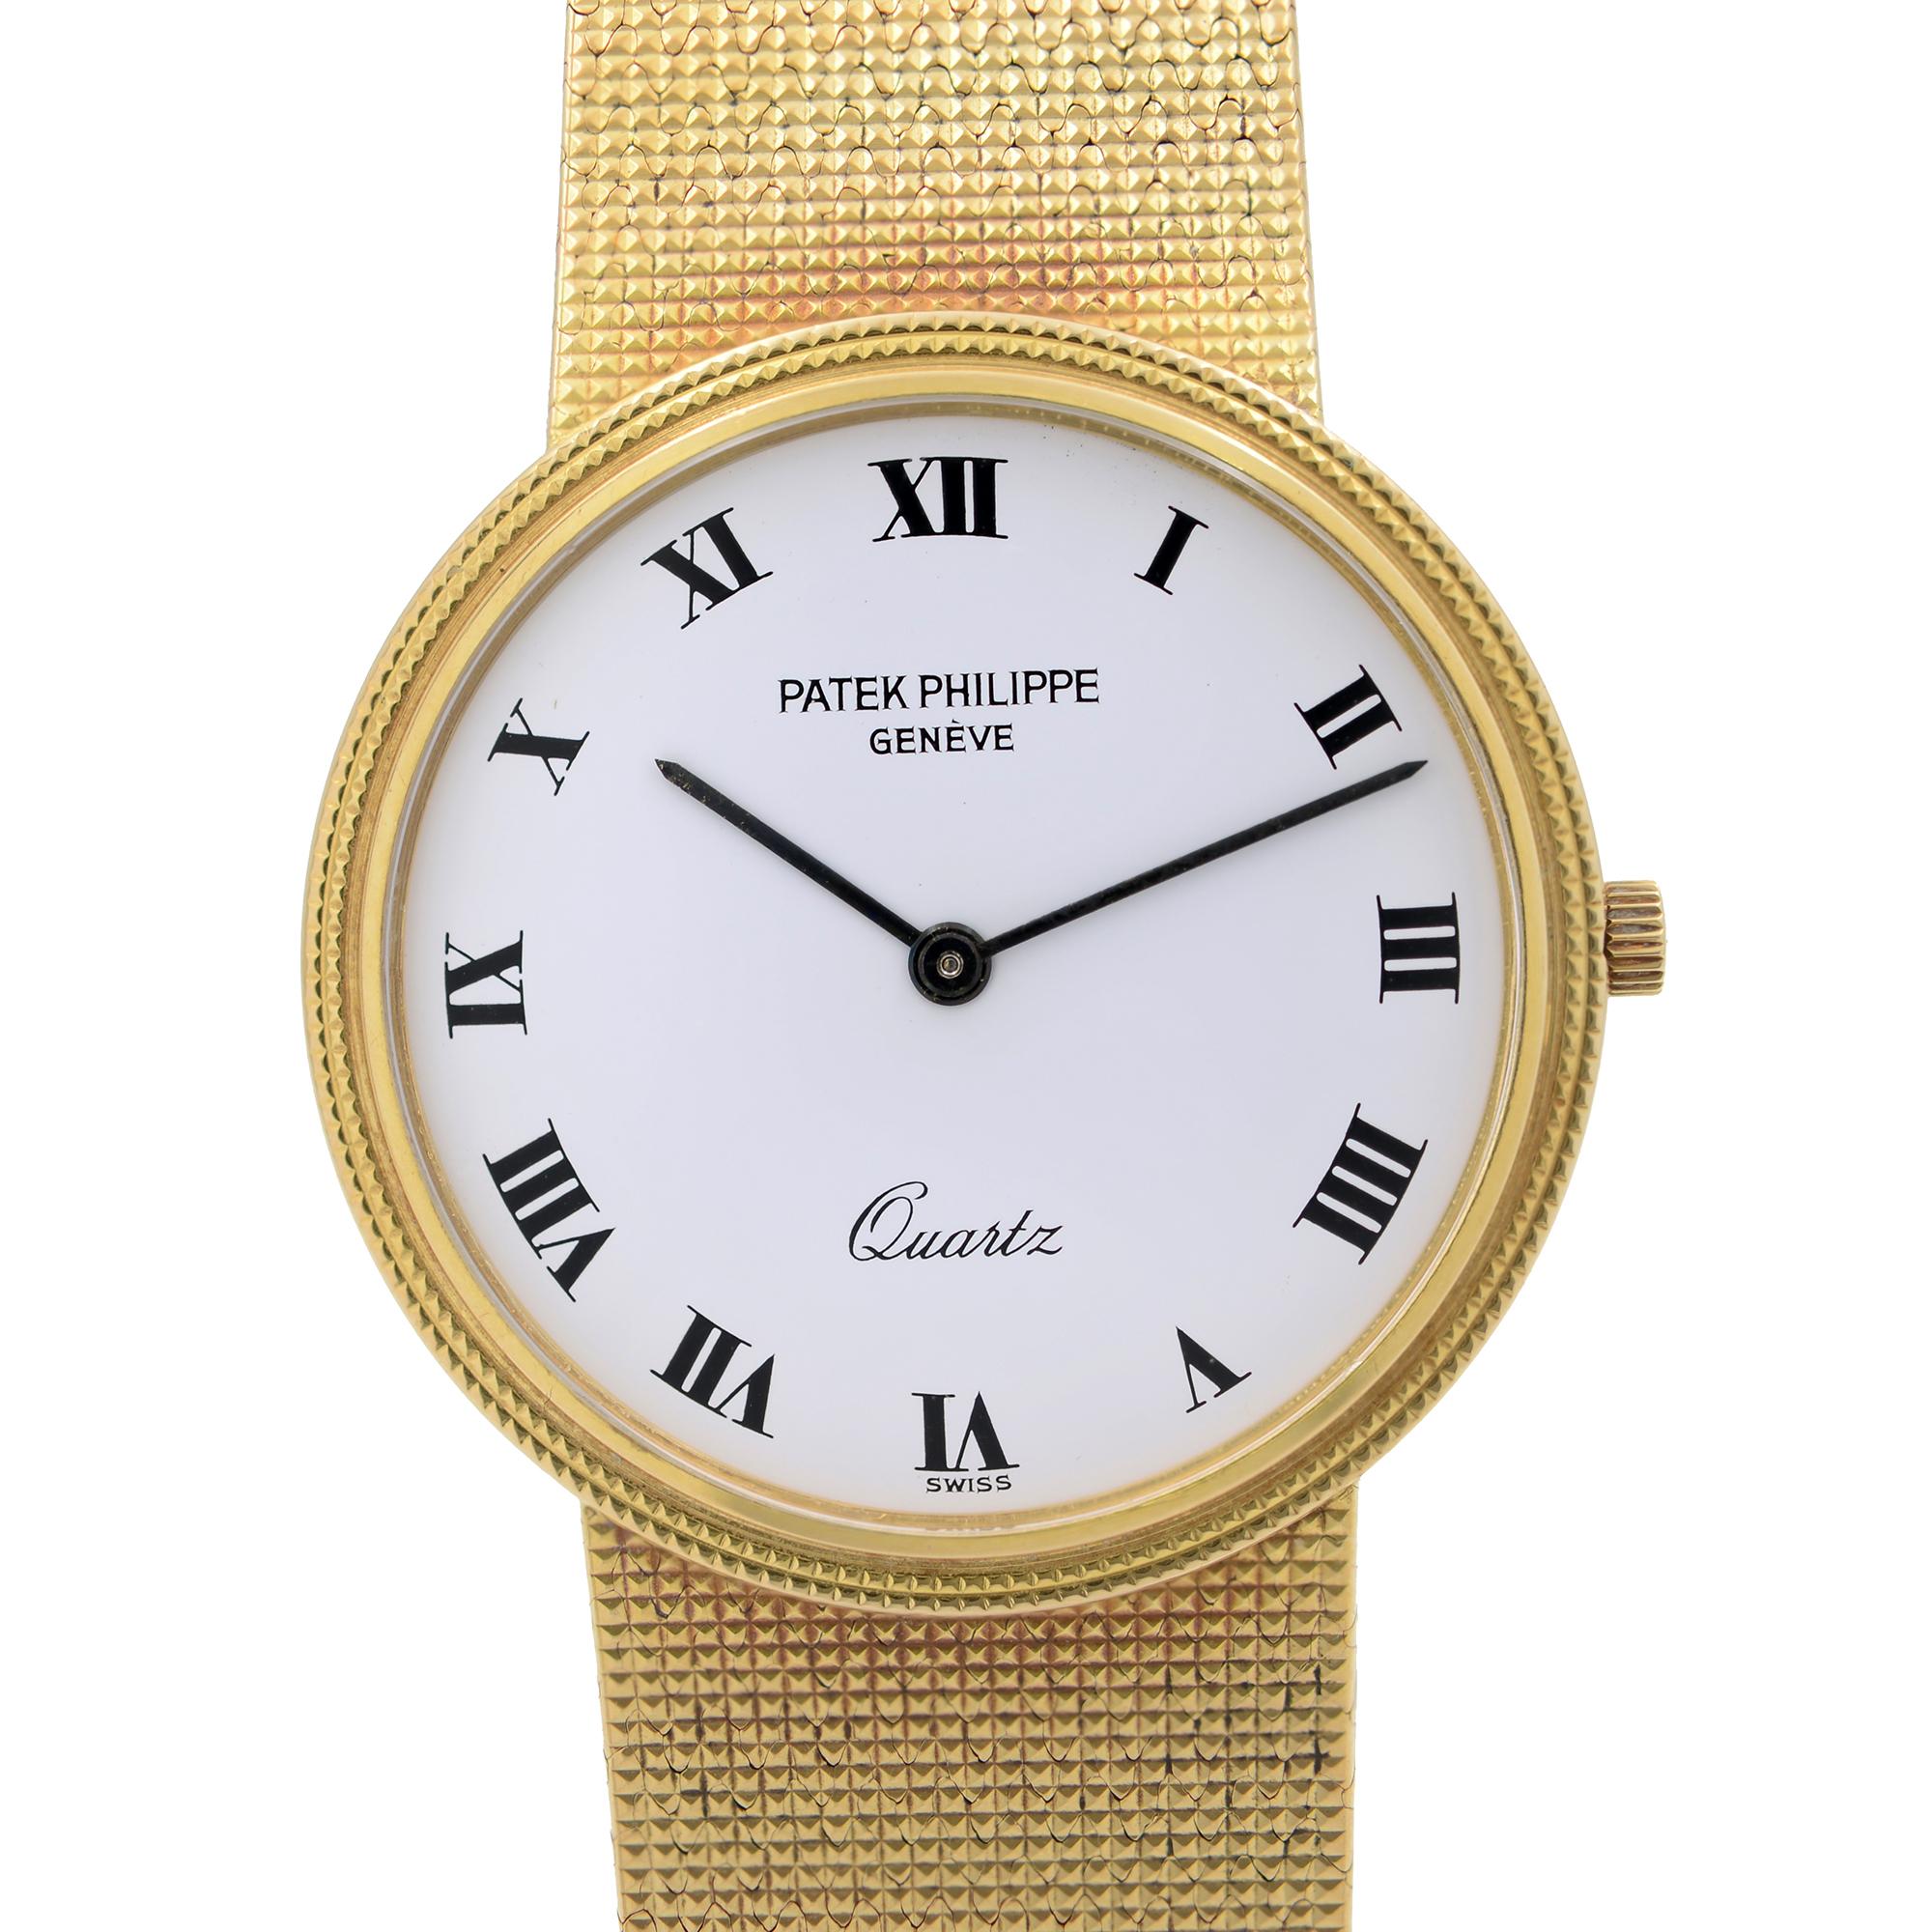 Pre Owned Patek Philippe Calatrava Yellow Gold White Dial Quartz Vintage Unisex Watch 3744. Minor hole on the band as visible in pictures. This Beautiful Timepiece Features: 18k Yellow Gold Case & Bracelet, Fixed 18k Gold Bezel, White Dial with